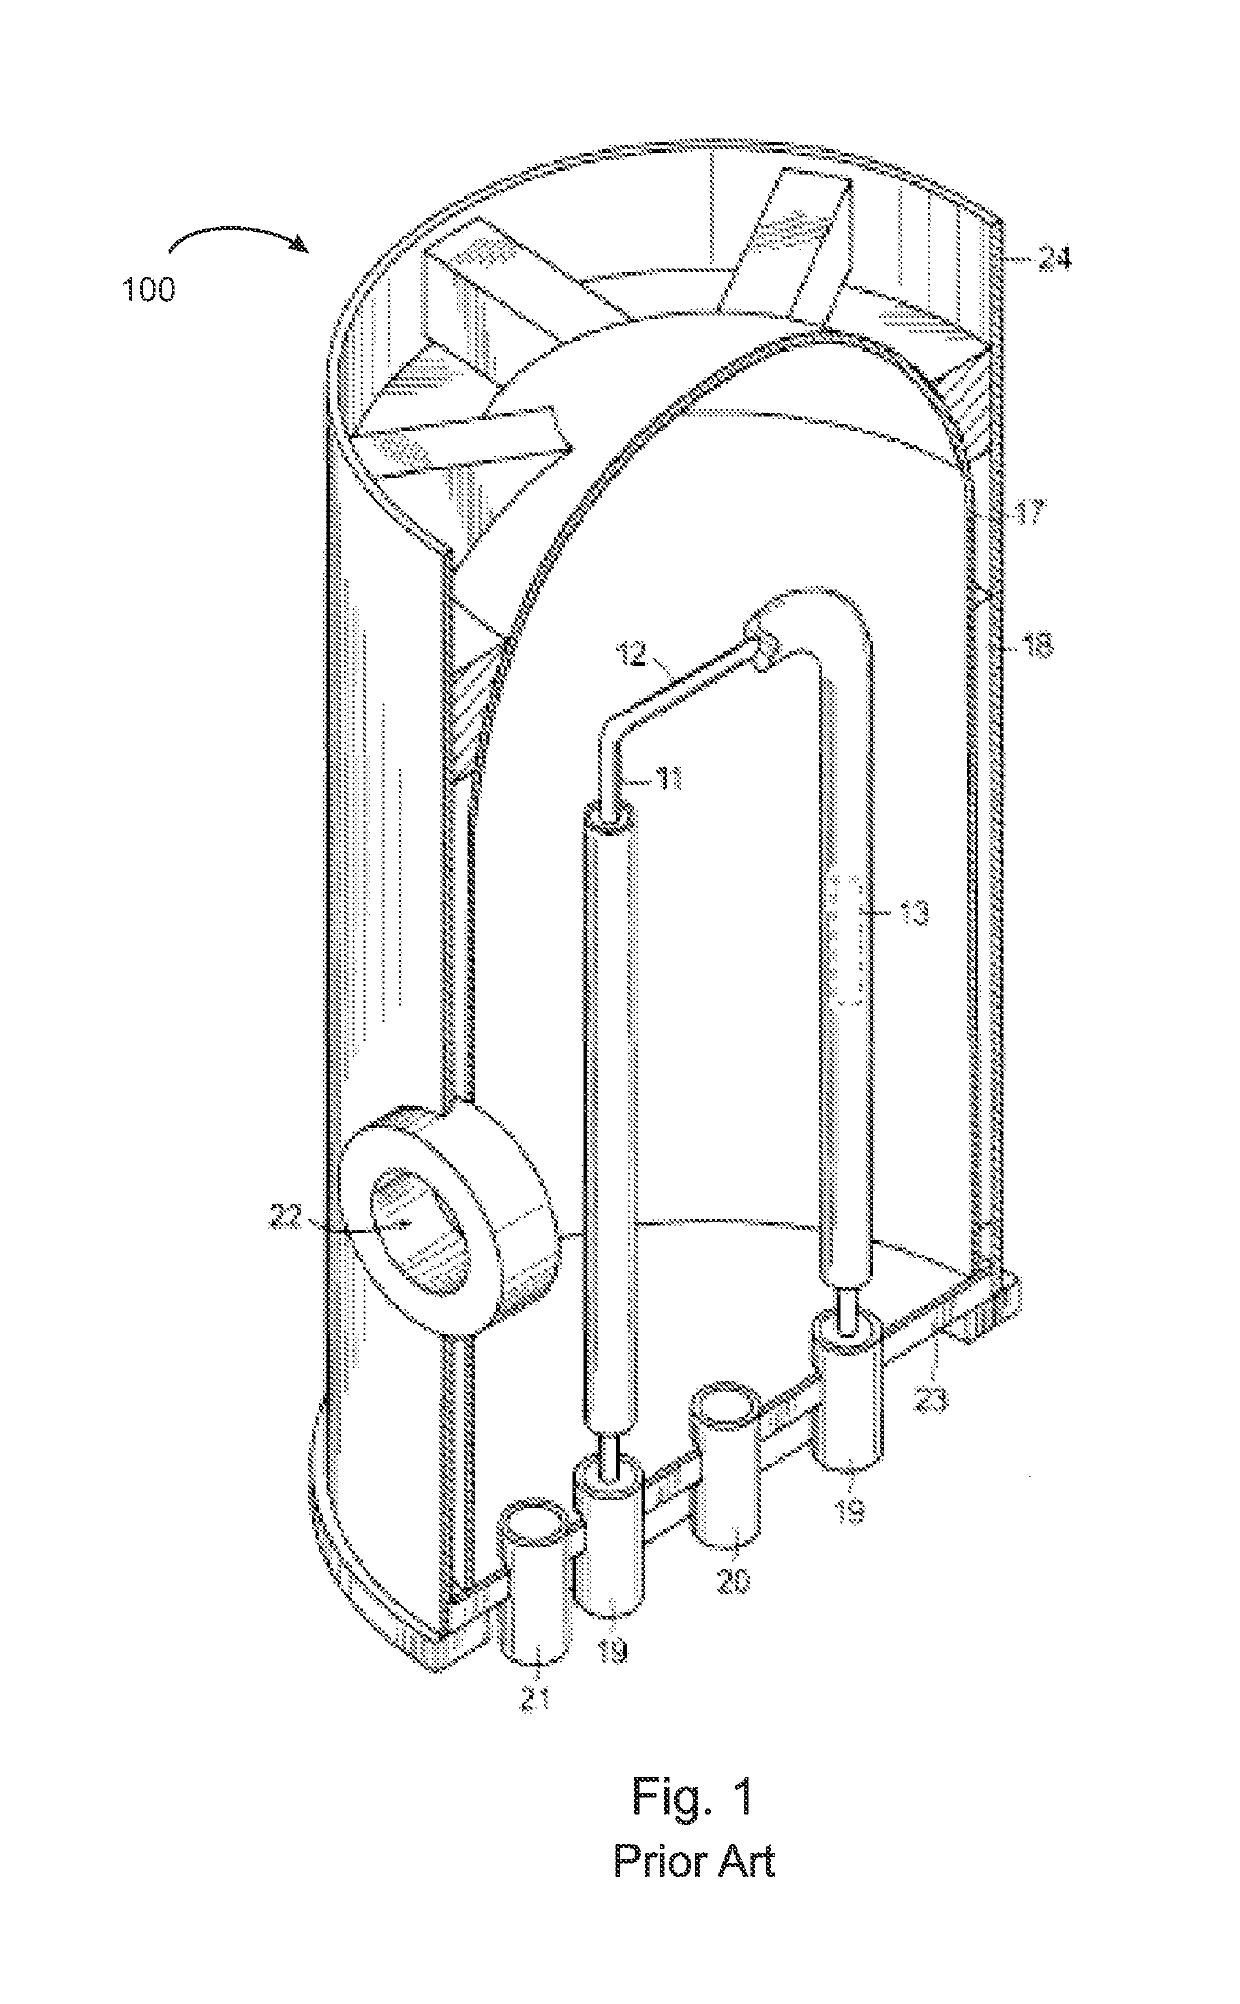 Reactor filament assembly with enhanced misalignment tolerance